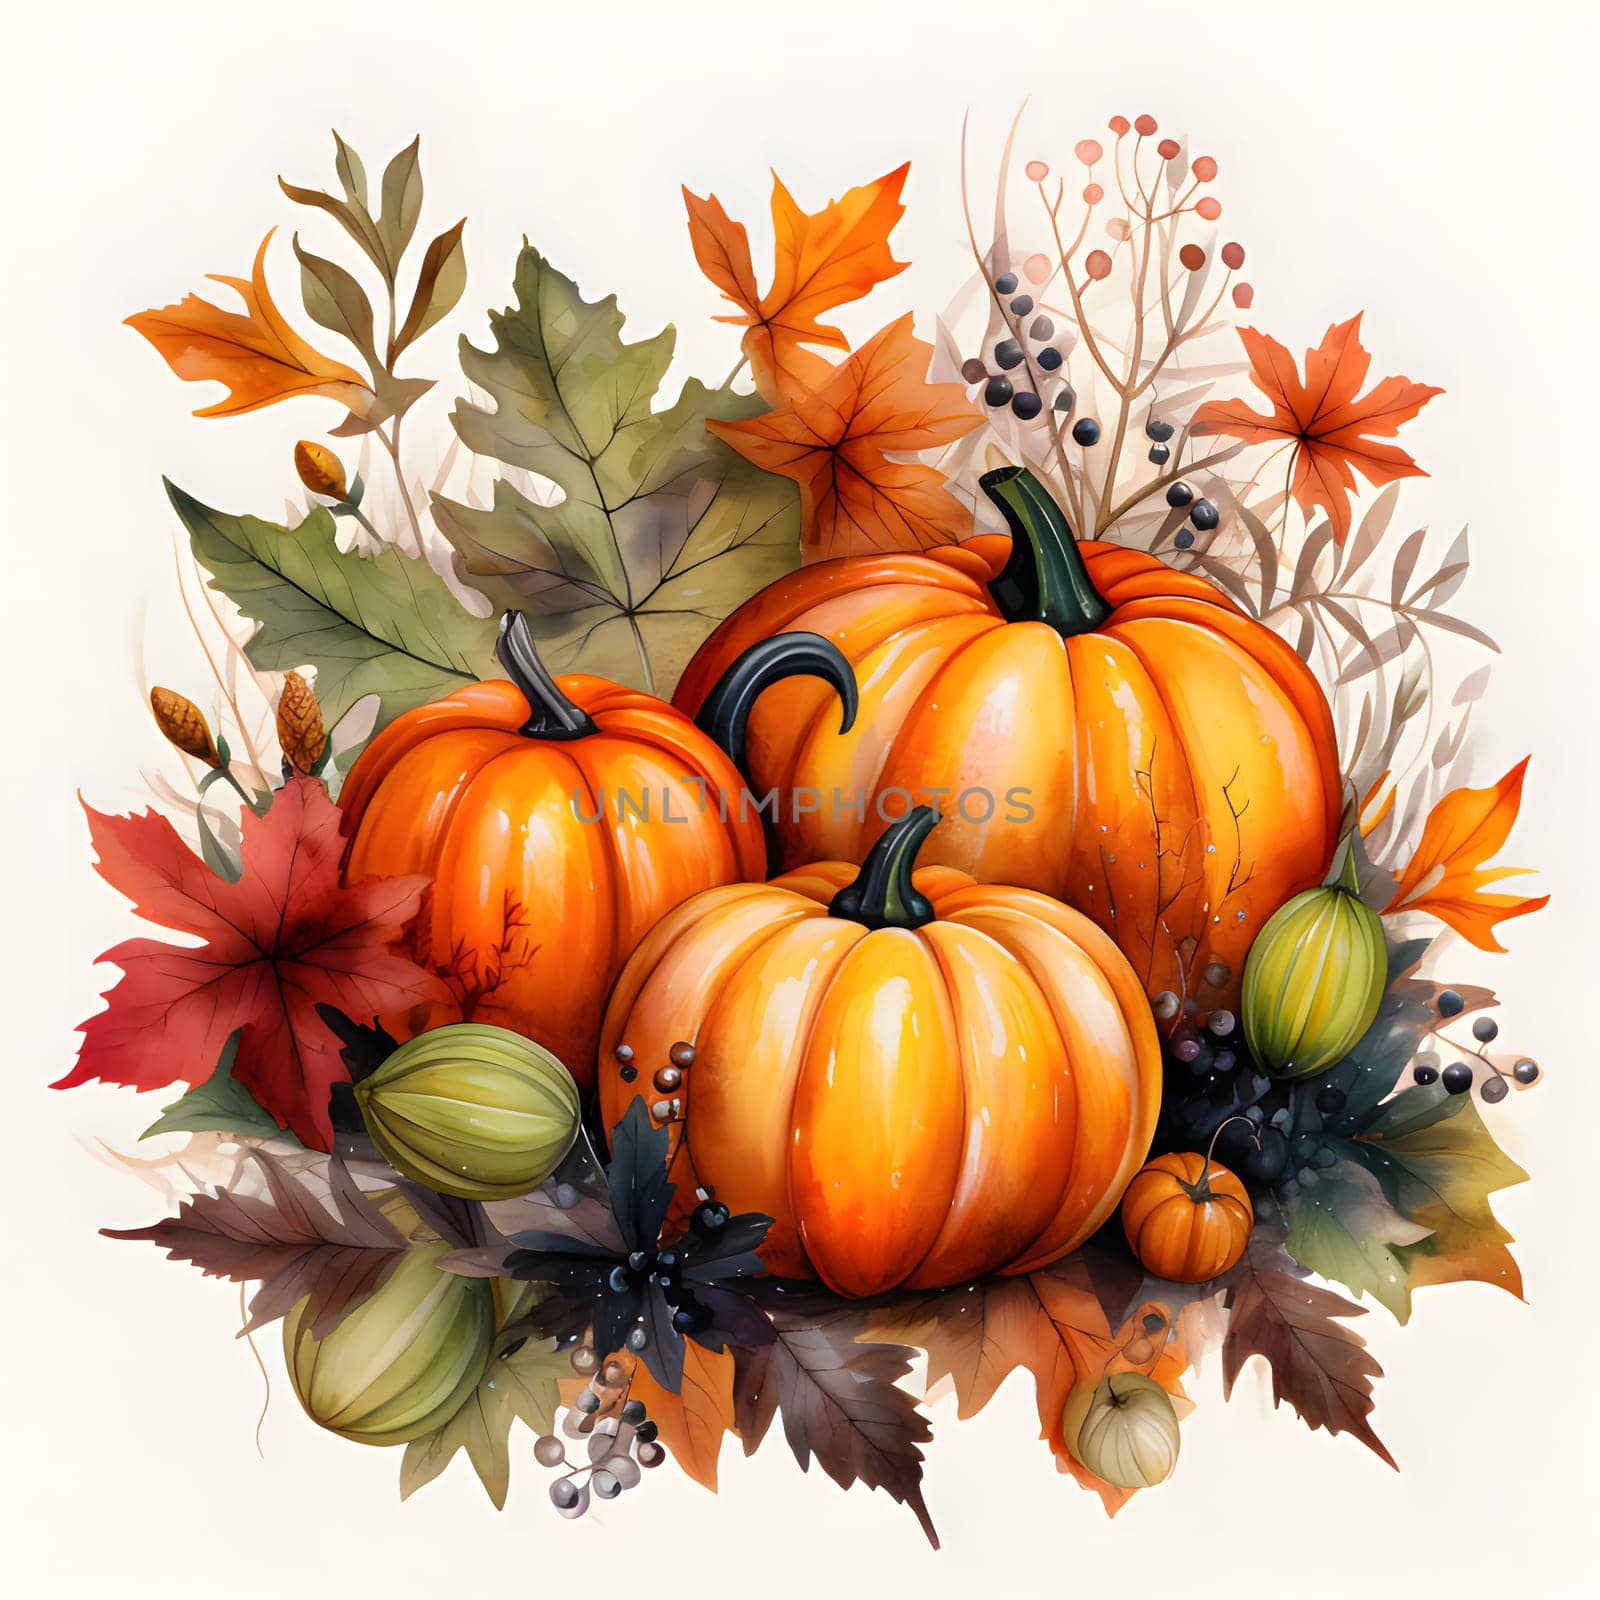 Illustration of pumpkins around autumn leaves. Pumpkin as a dish of thanksgiving for the harvest, picture on a white isolated background. An atmosphere of joy and celebration.